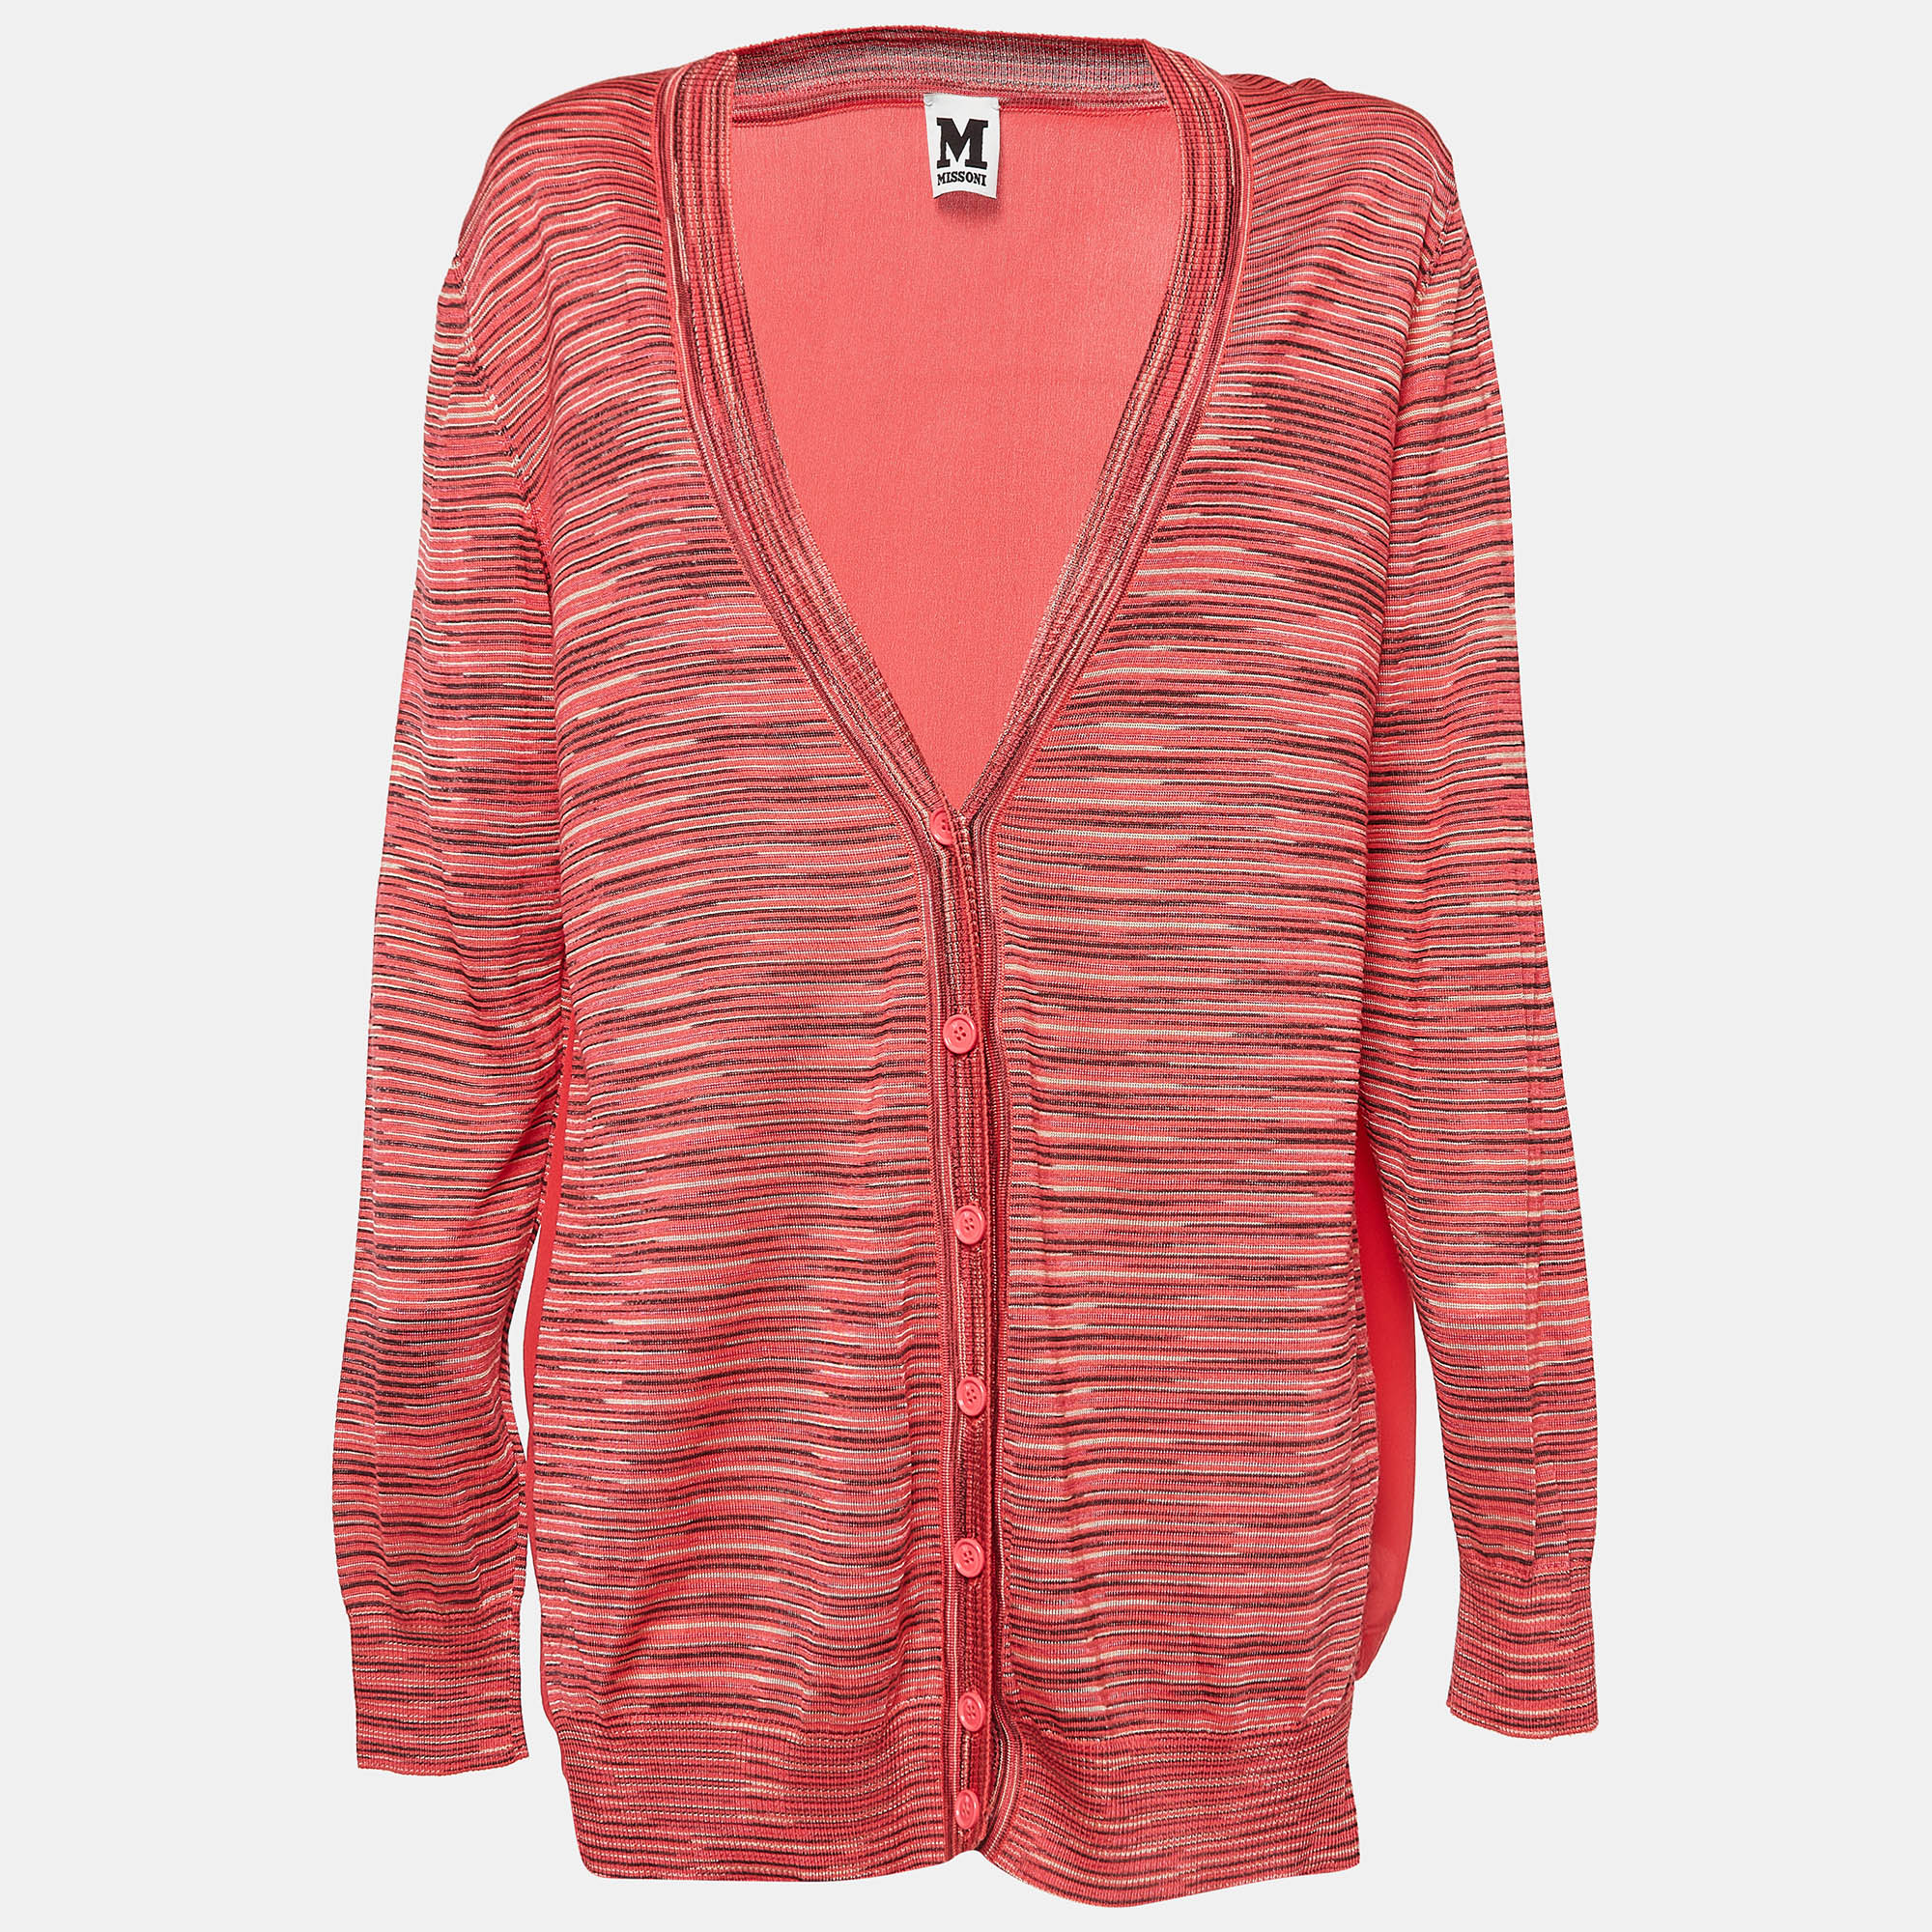 

M Missoni Pink Patterned Knit Button Front Cardigan M